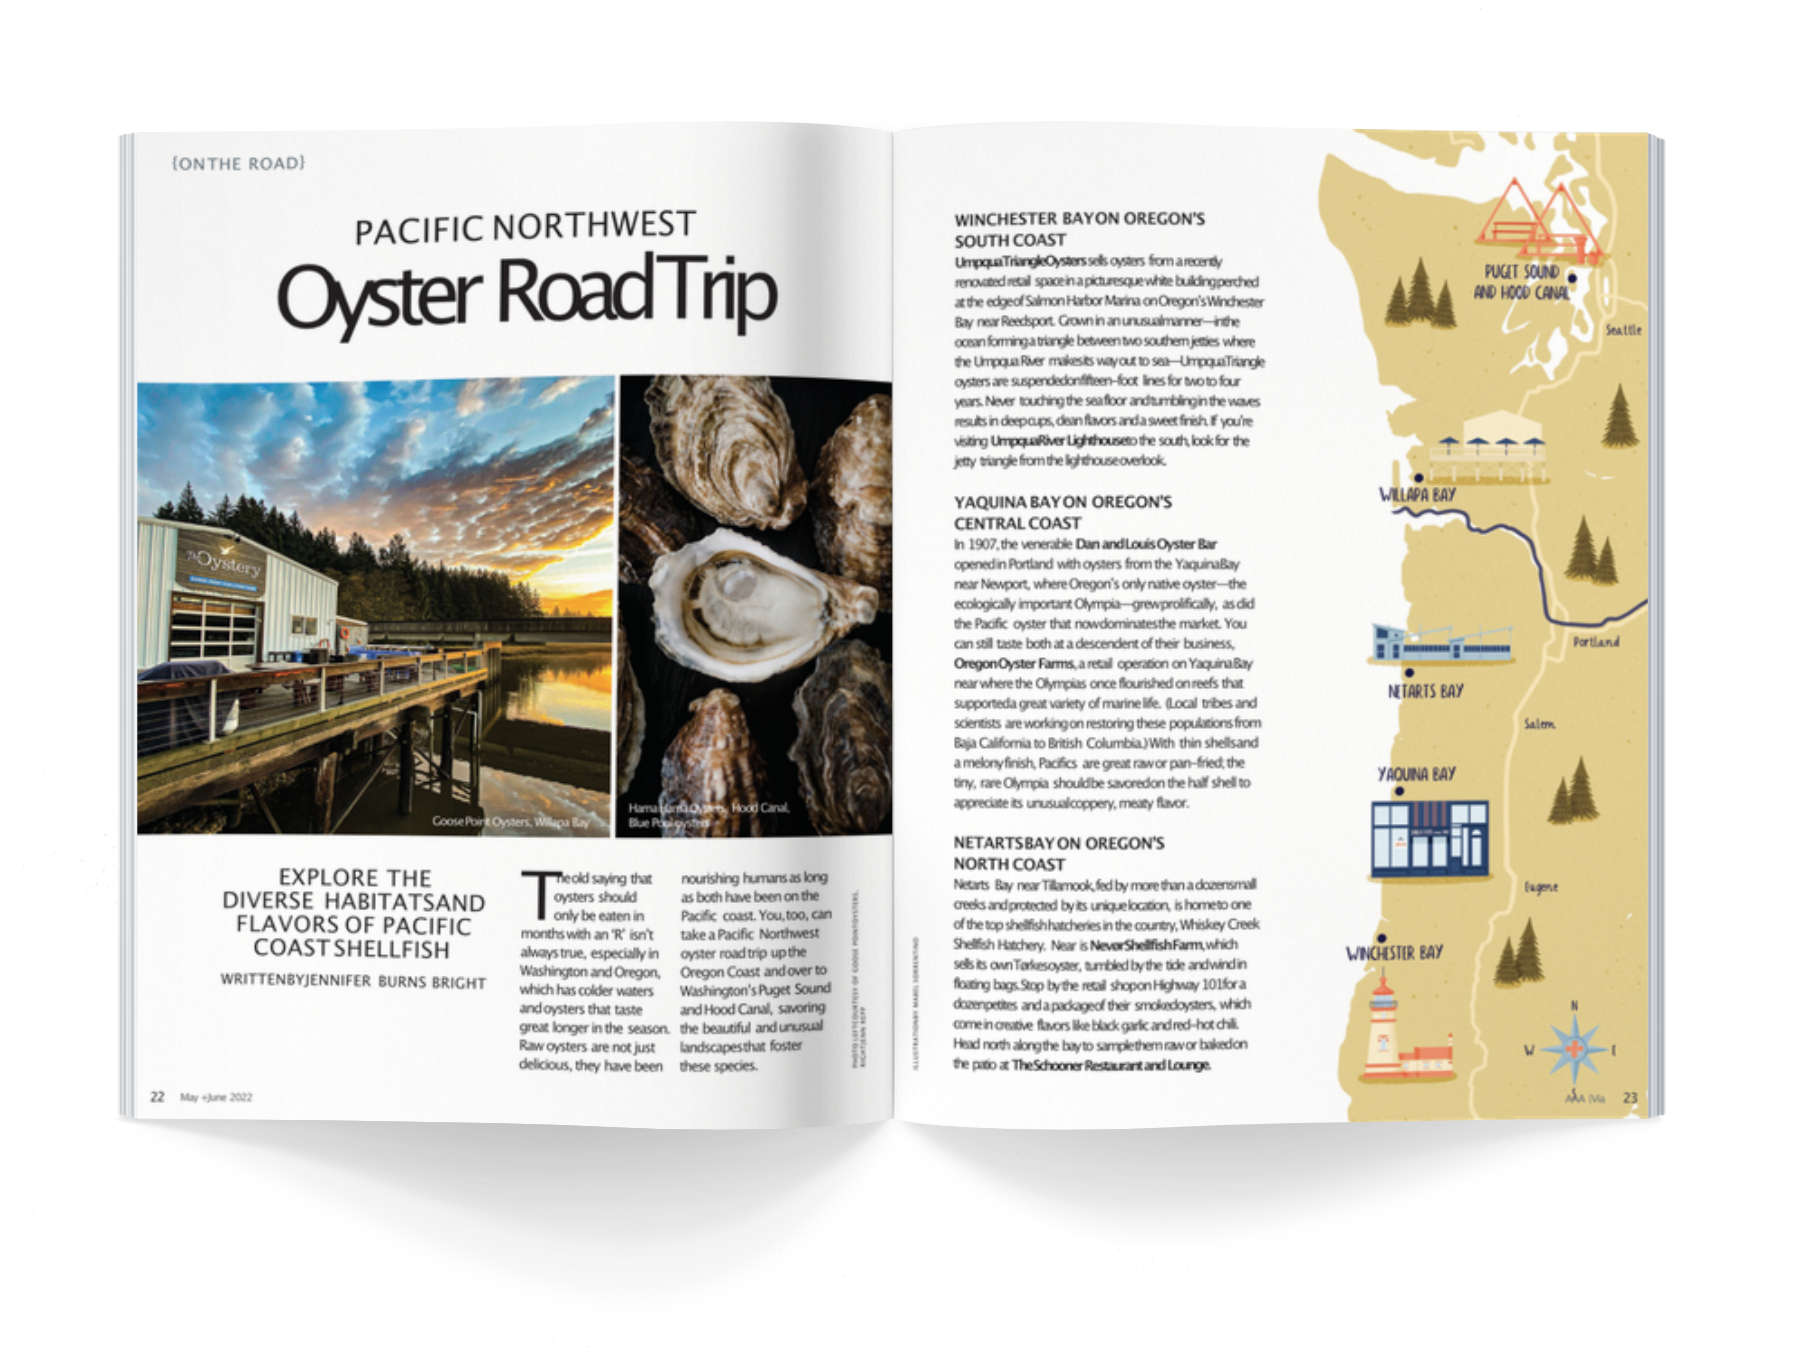 Pacific northwest illustrated map for Via Magazine